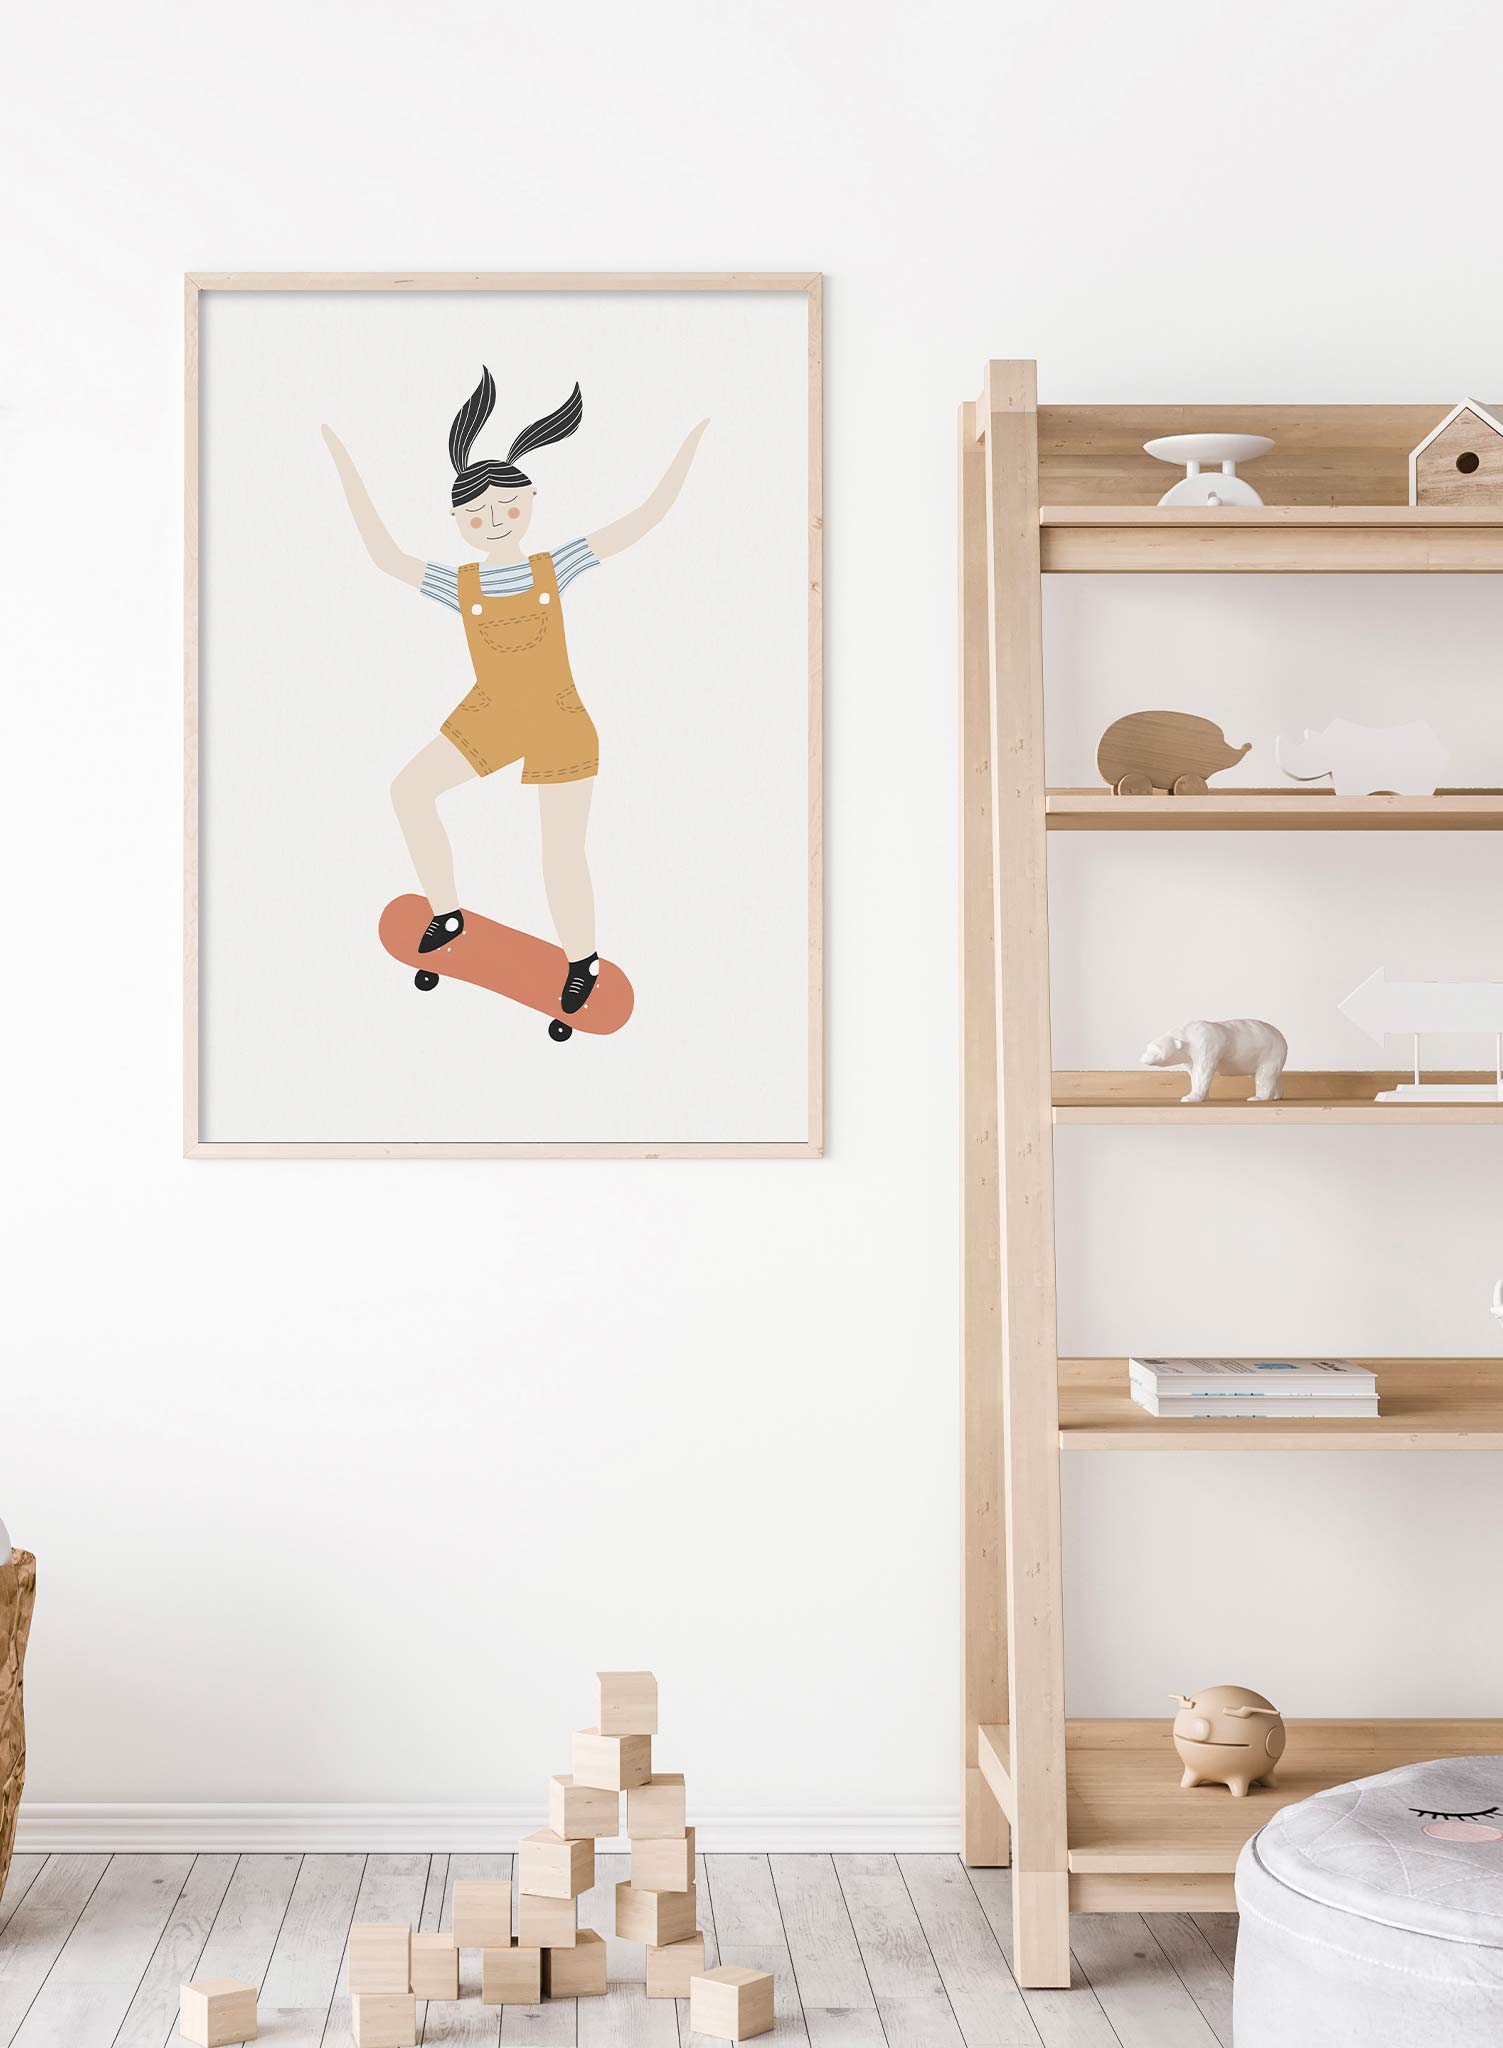 S8ter Girl is a minimalist illustration by Opposite Wall of a girl enjoying her ride on her skateboard.